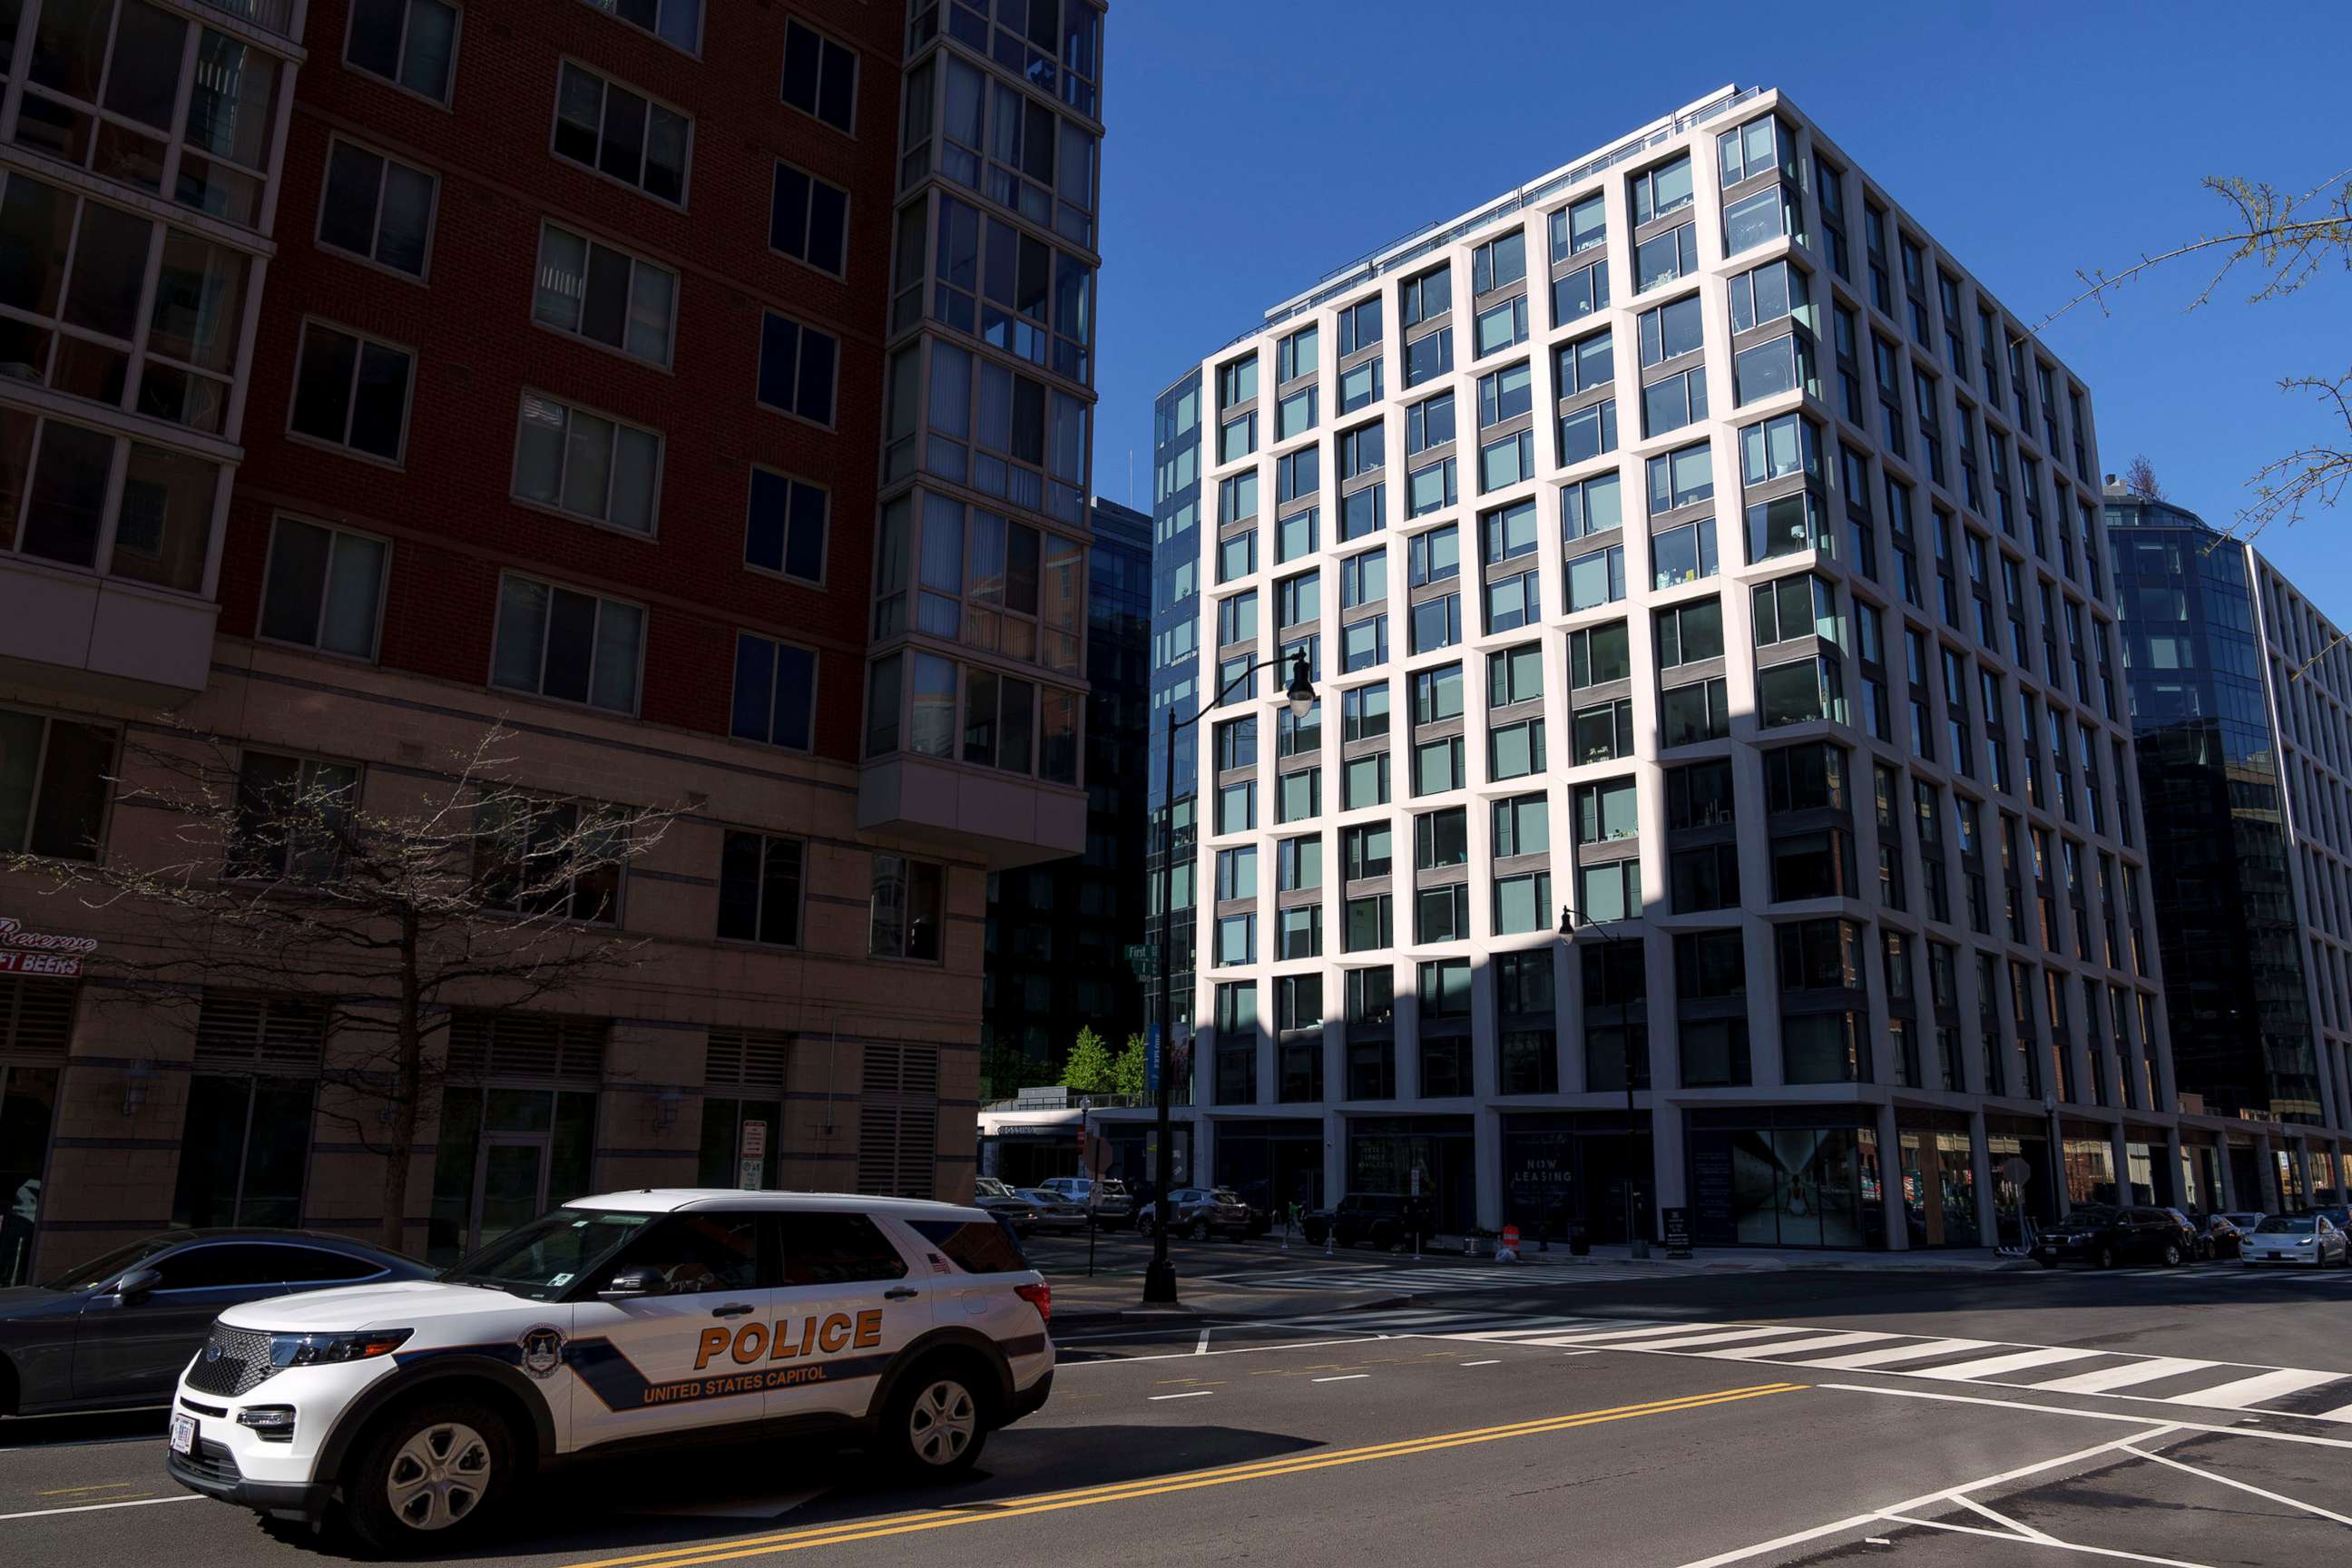 PHOTO: A Capitol Police vehicle drives past The Crossing apartment building on April 8, 2022 in Washington, D.C. The building, which was raided by the FBI on April 6, is the home of two men accused of posing as federal law enforcement employees.